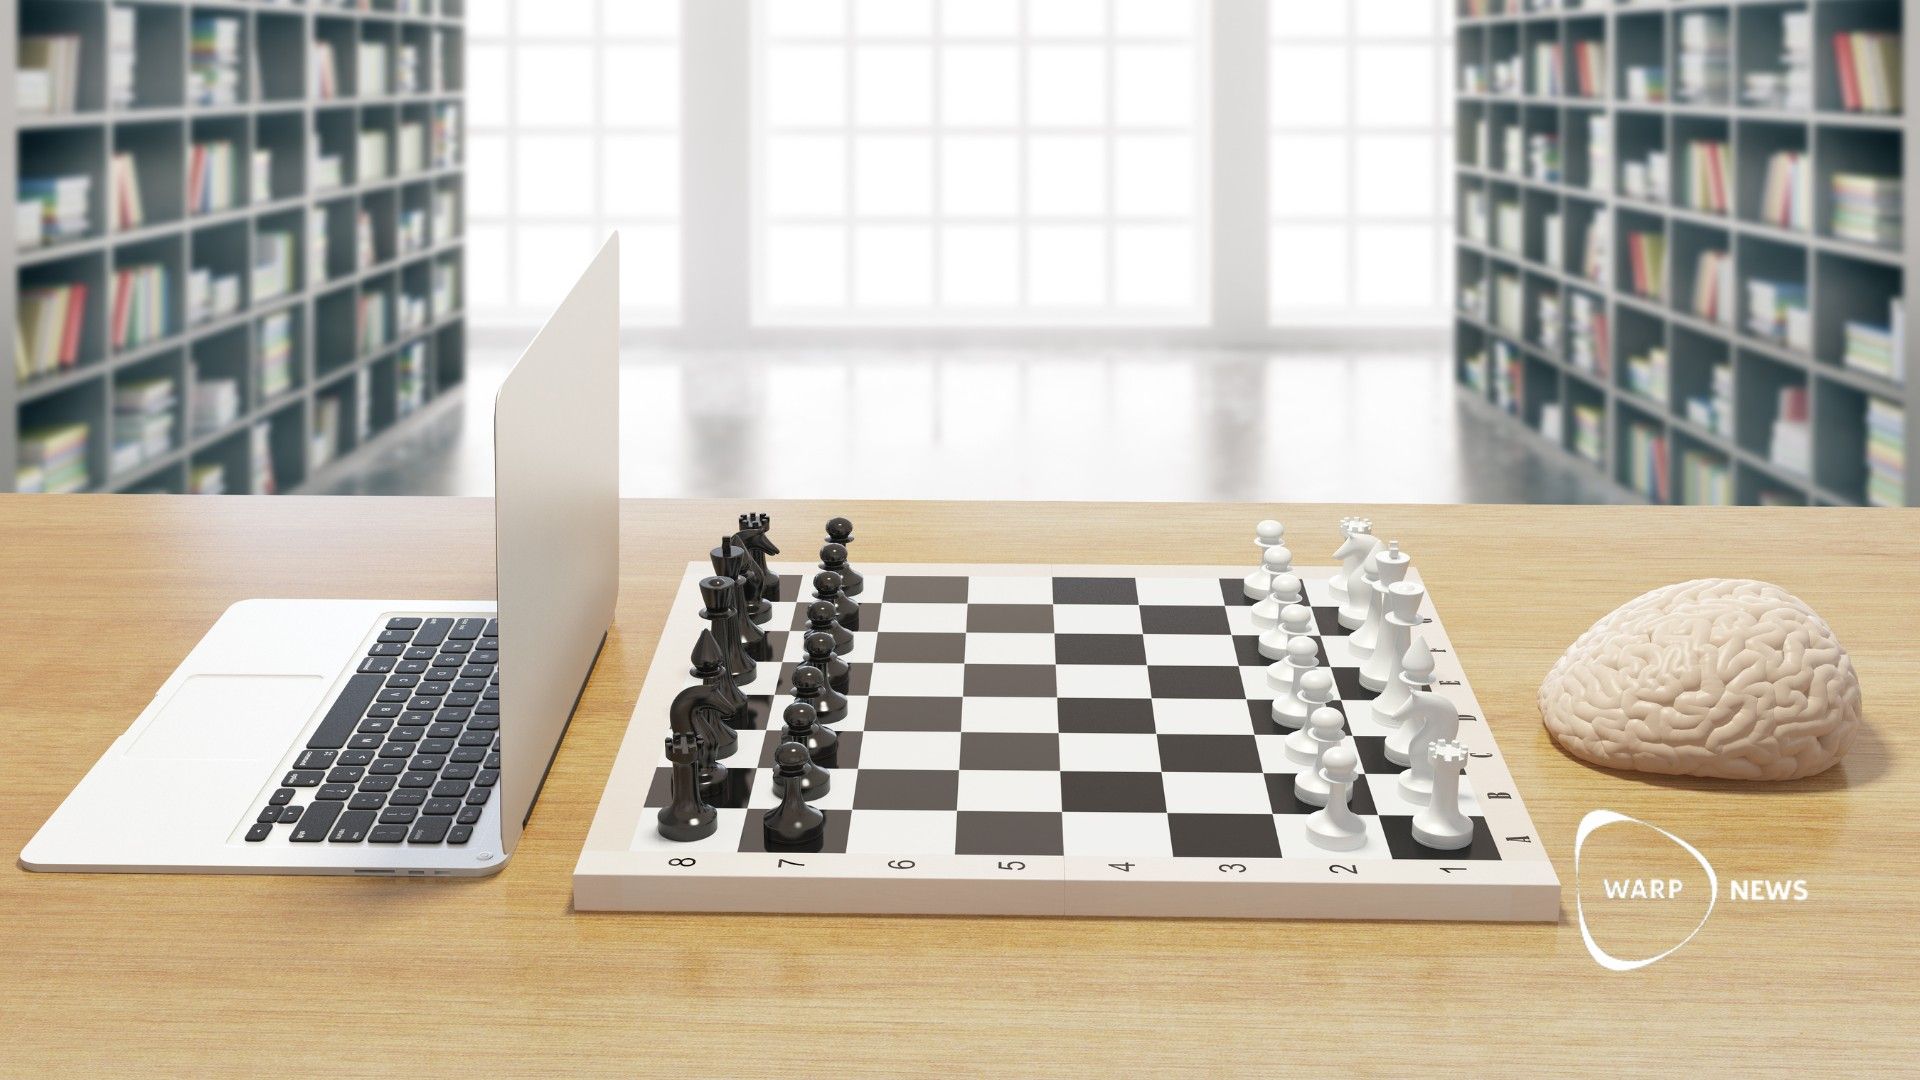 No human has beaten a computer in a chess tournament for more than